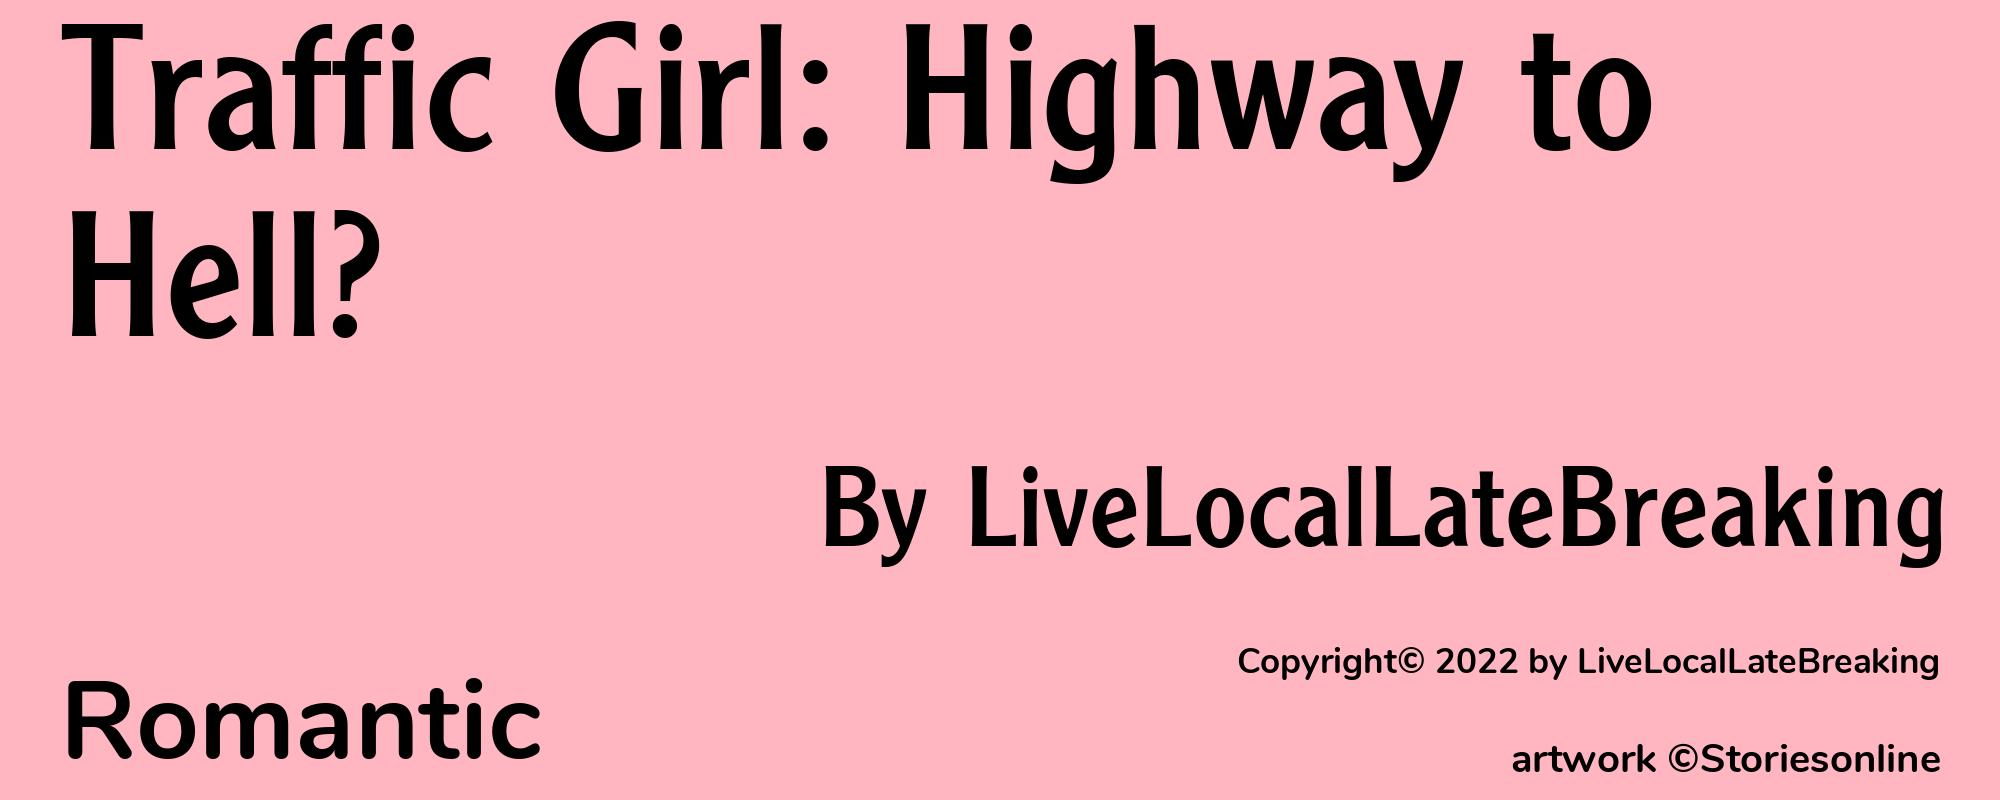 Traffic Girl: Highway to Hell? - Cover